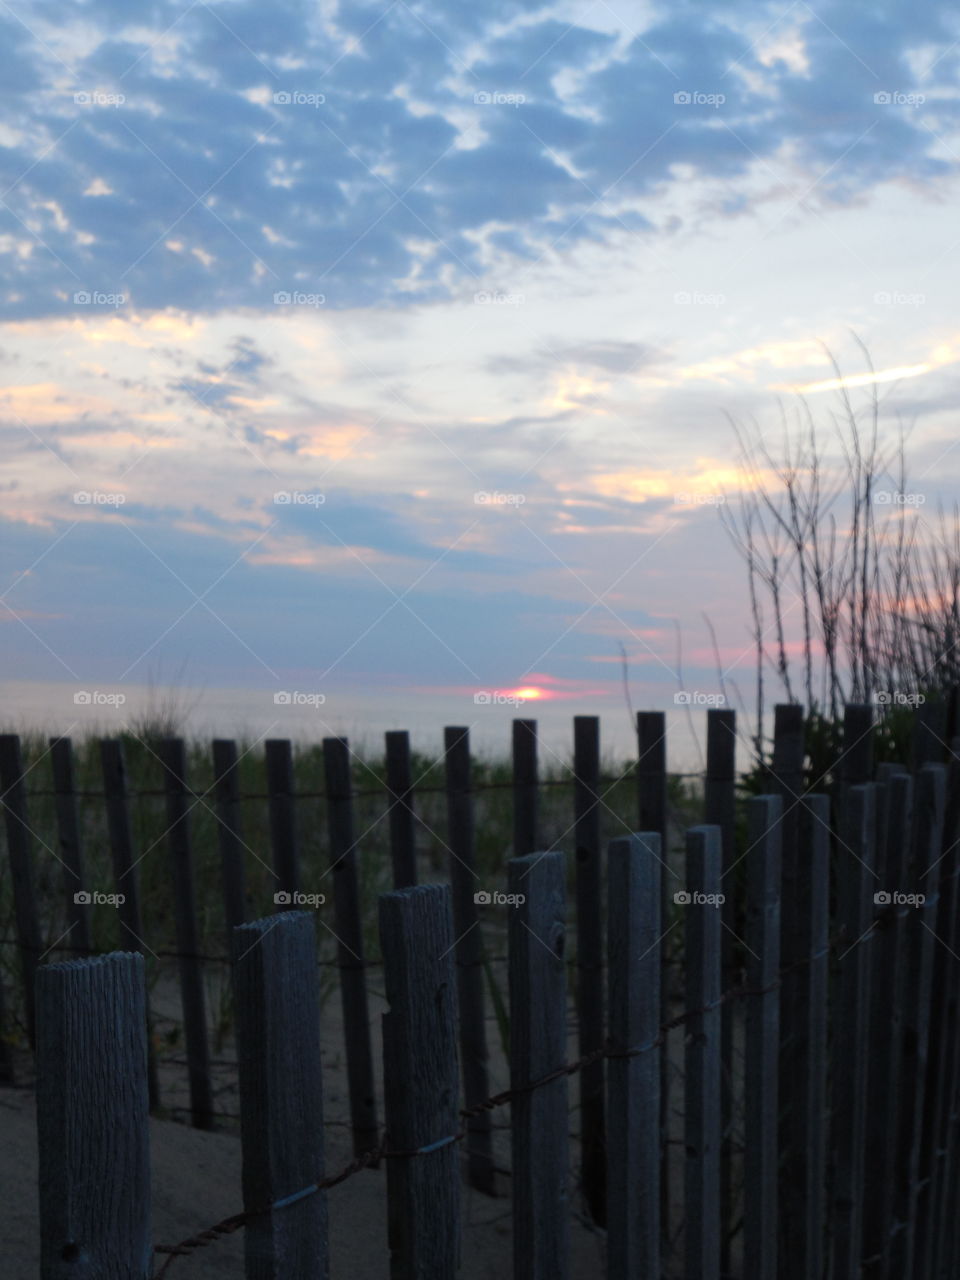 Sunrise over Dewey Beach Delaware dunes grass and fence